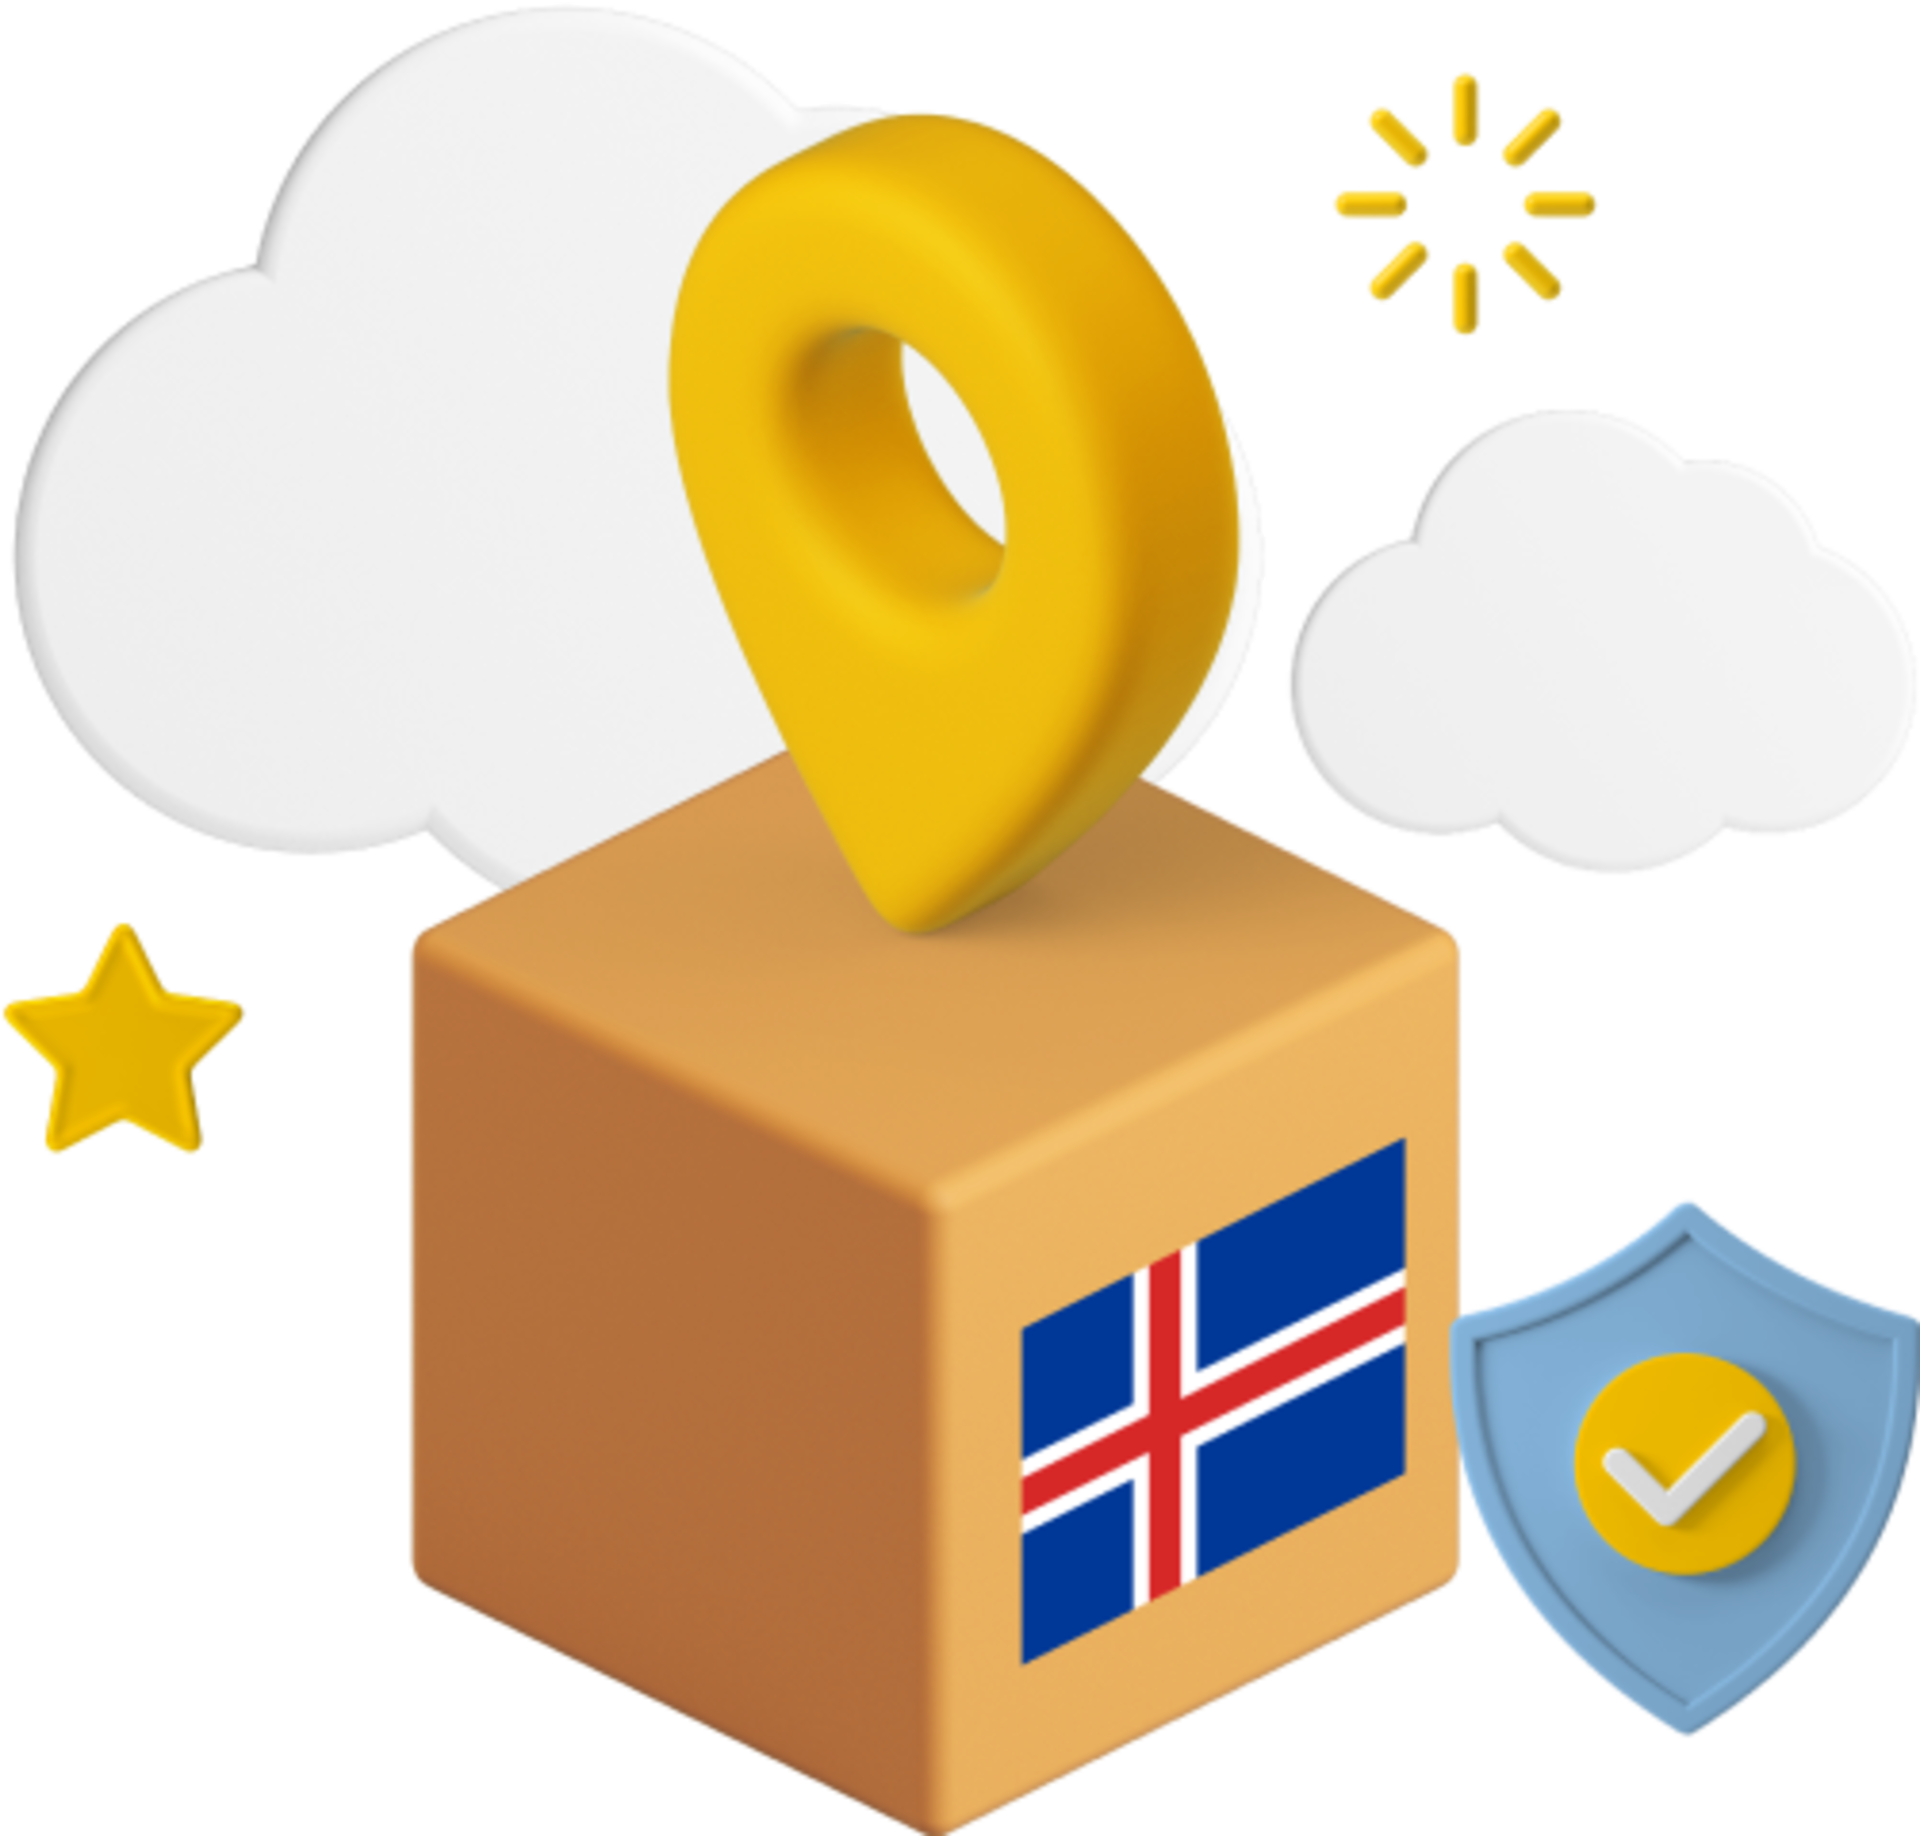 Iceland flag on box with location icon